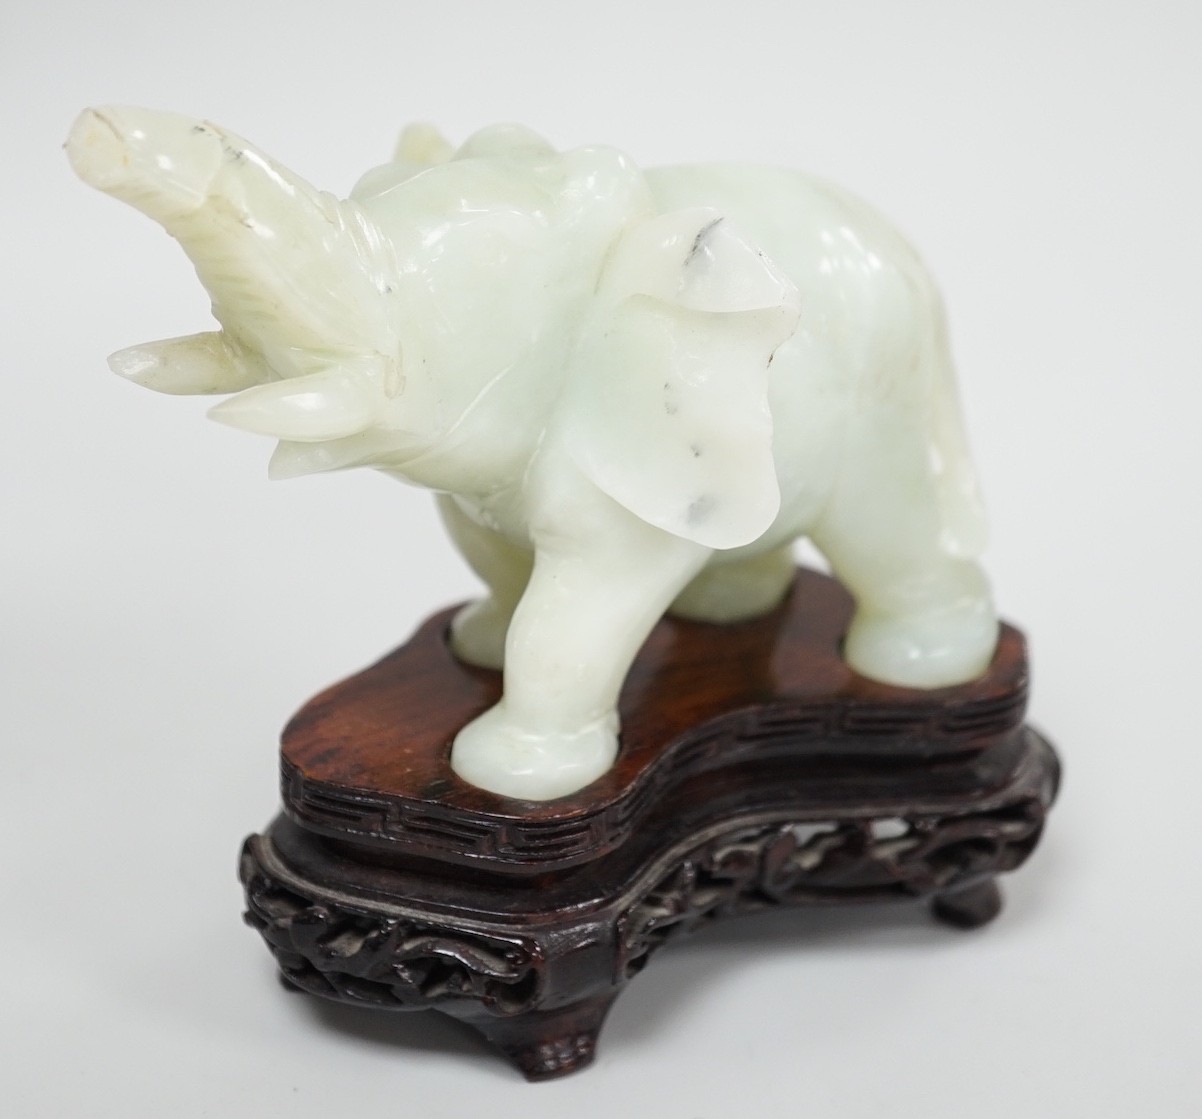 A Chinese bowenite jade elephant on hard wood stand, 11cm tall - Image 5 of 8